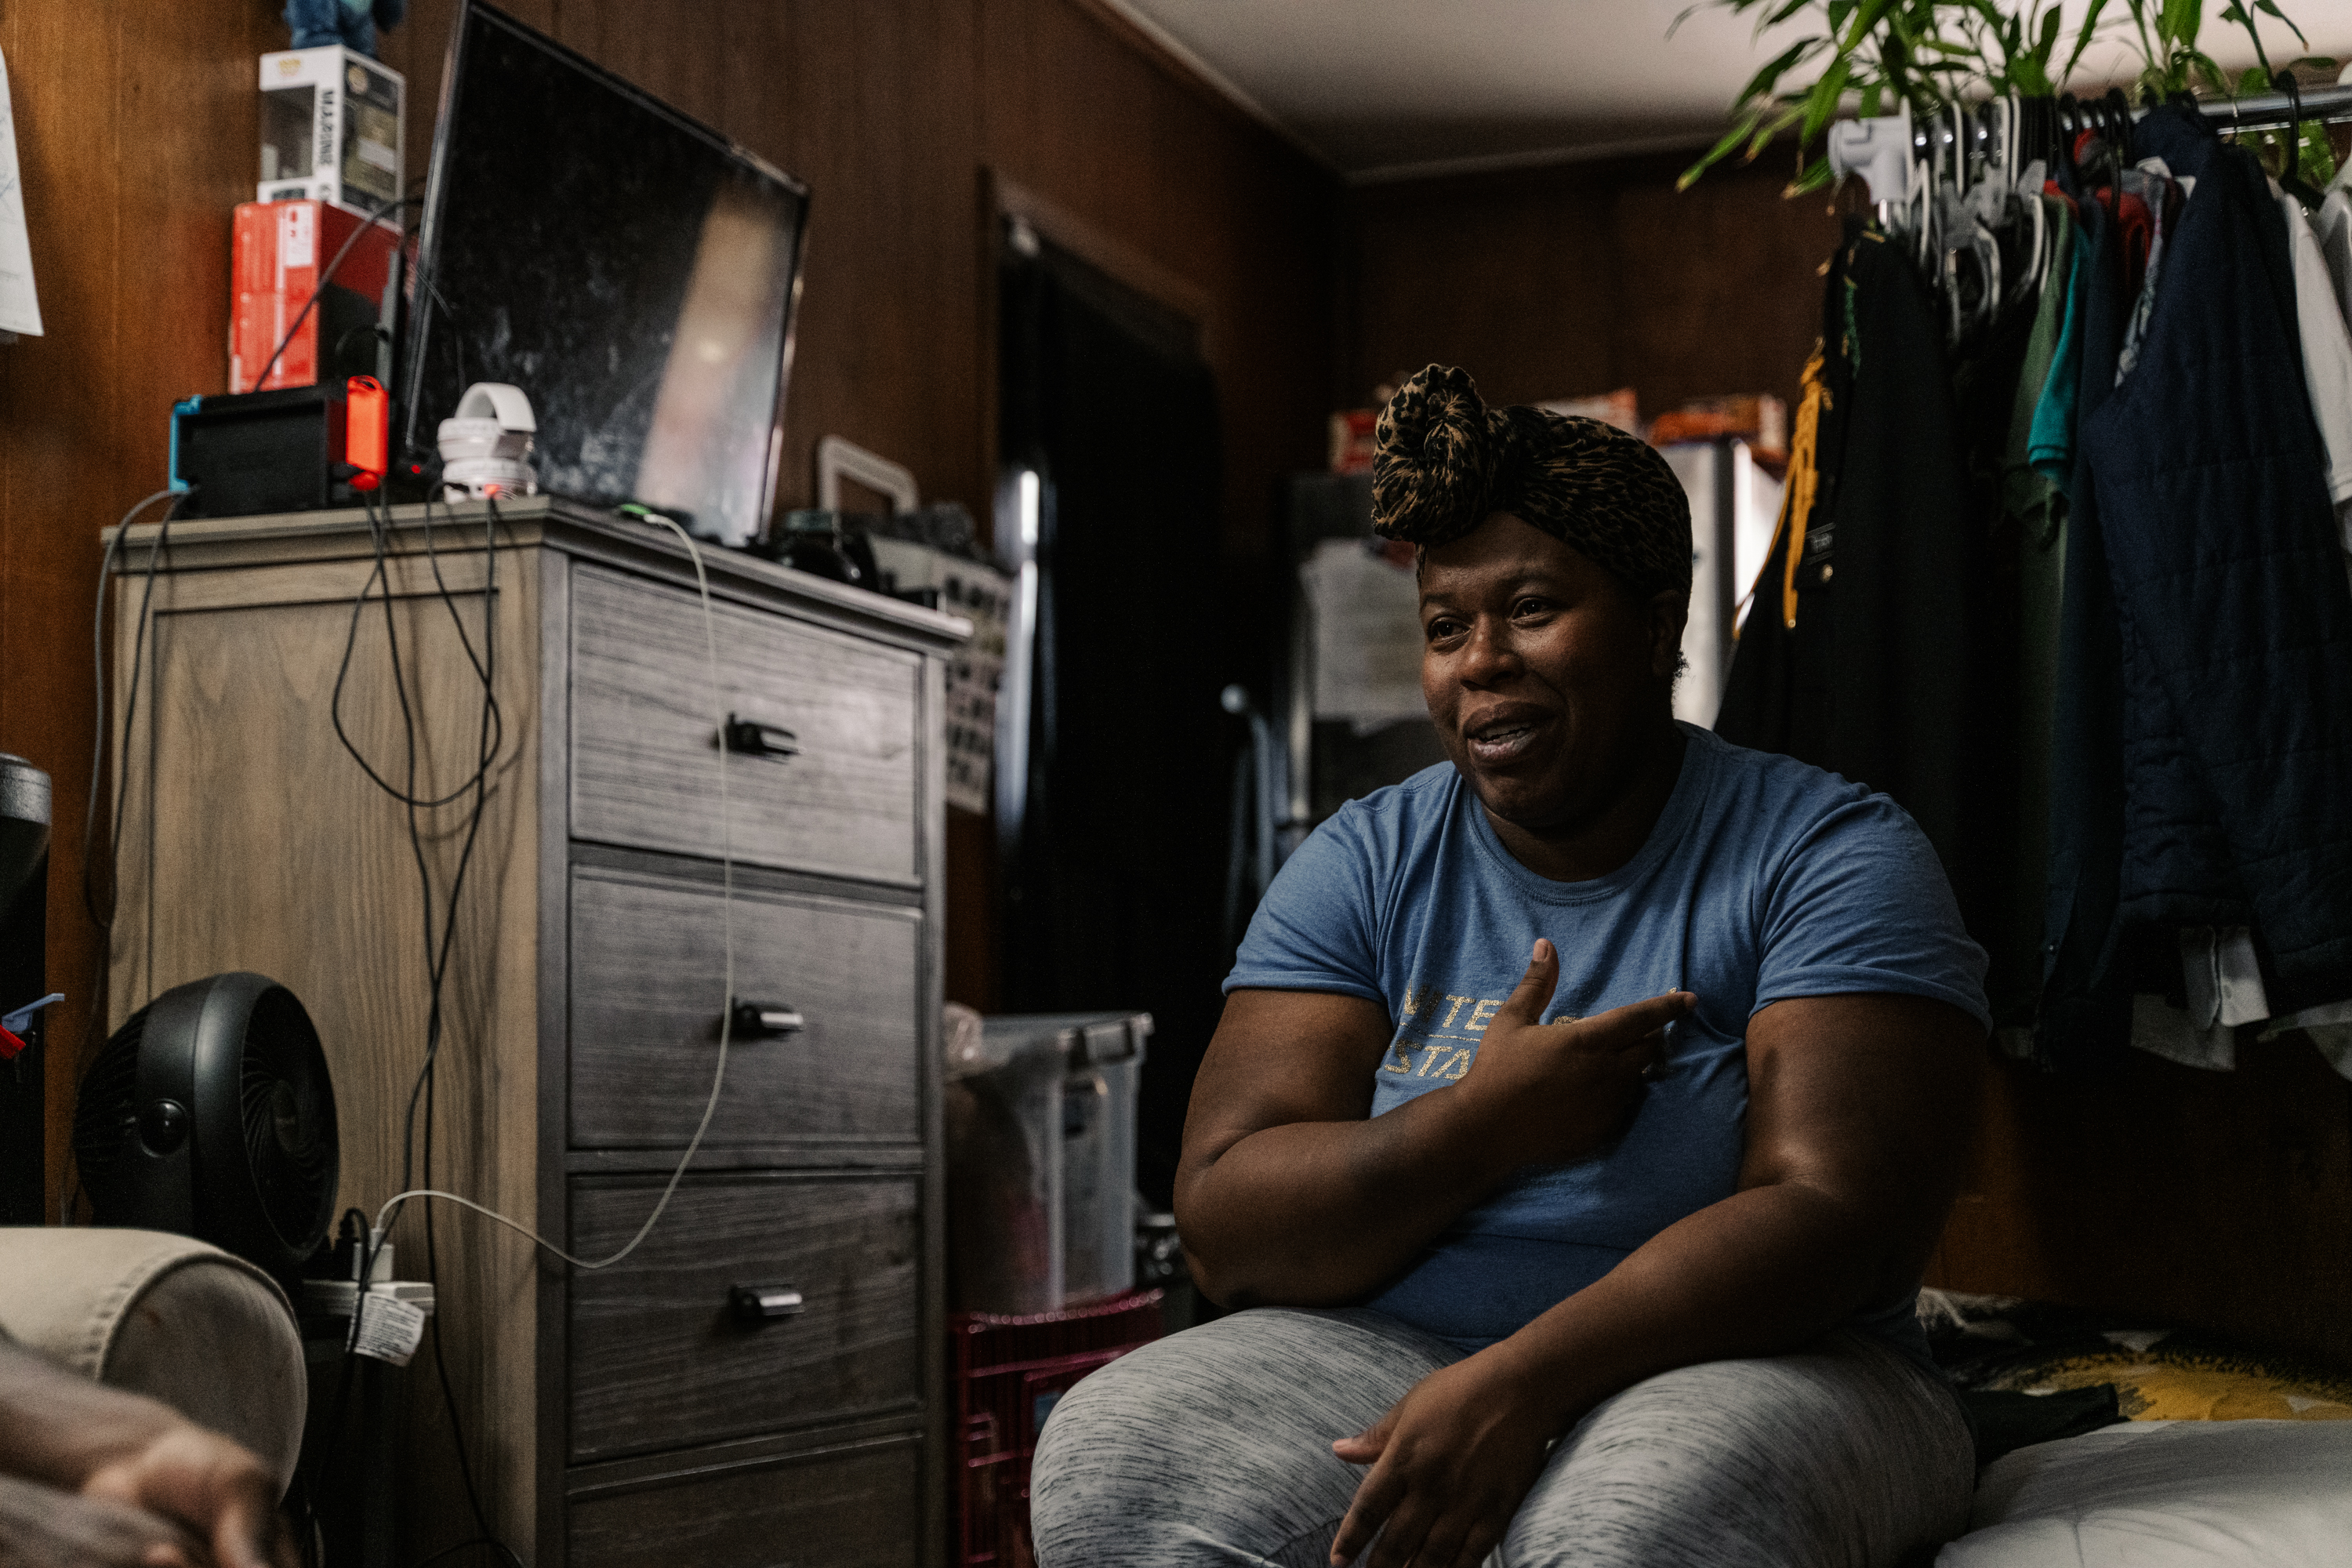 Latreise Berry speaks about her worries for her son as he enters his senior year at Kashmere Senior High School in Houston.